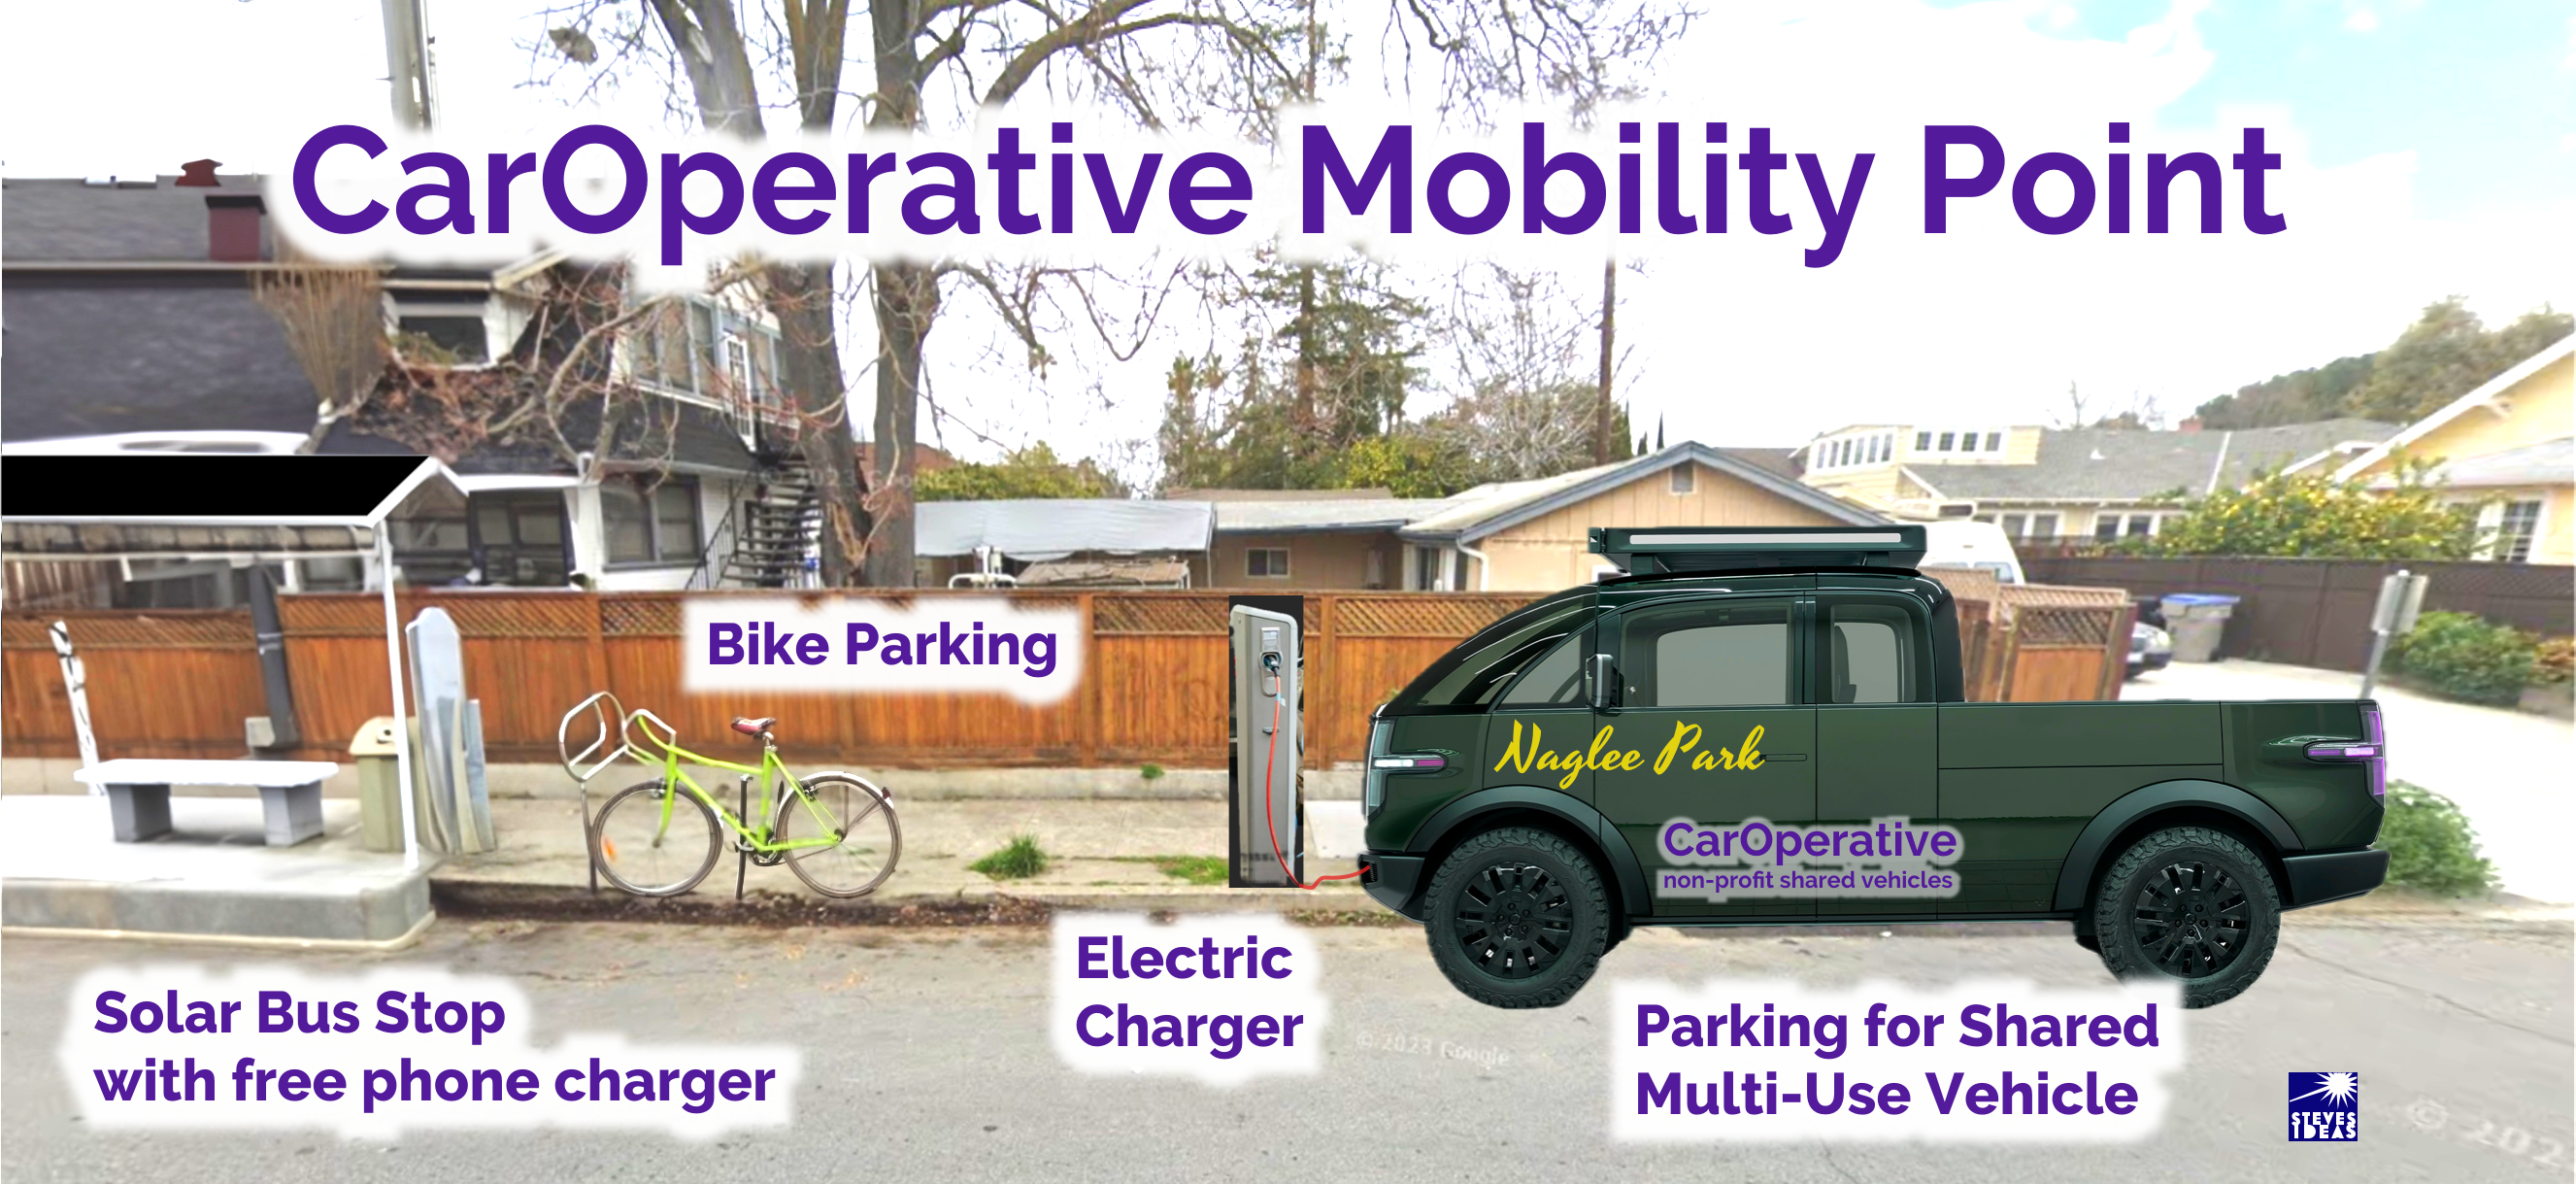 Car operative mobility point with Truck, EV charger, bike parking, and bus shelter with solar